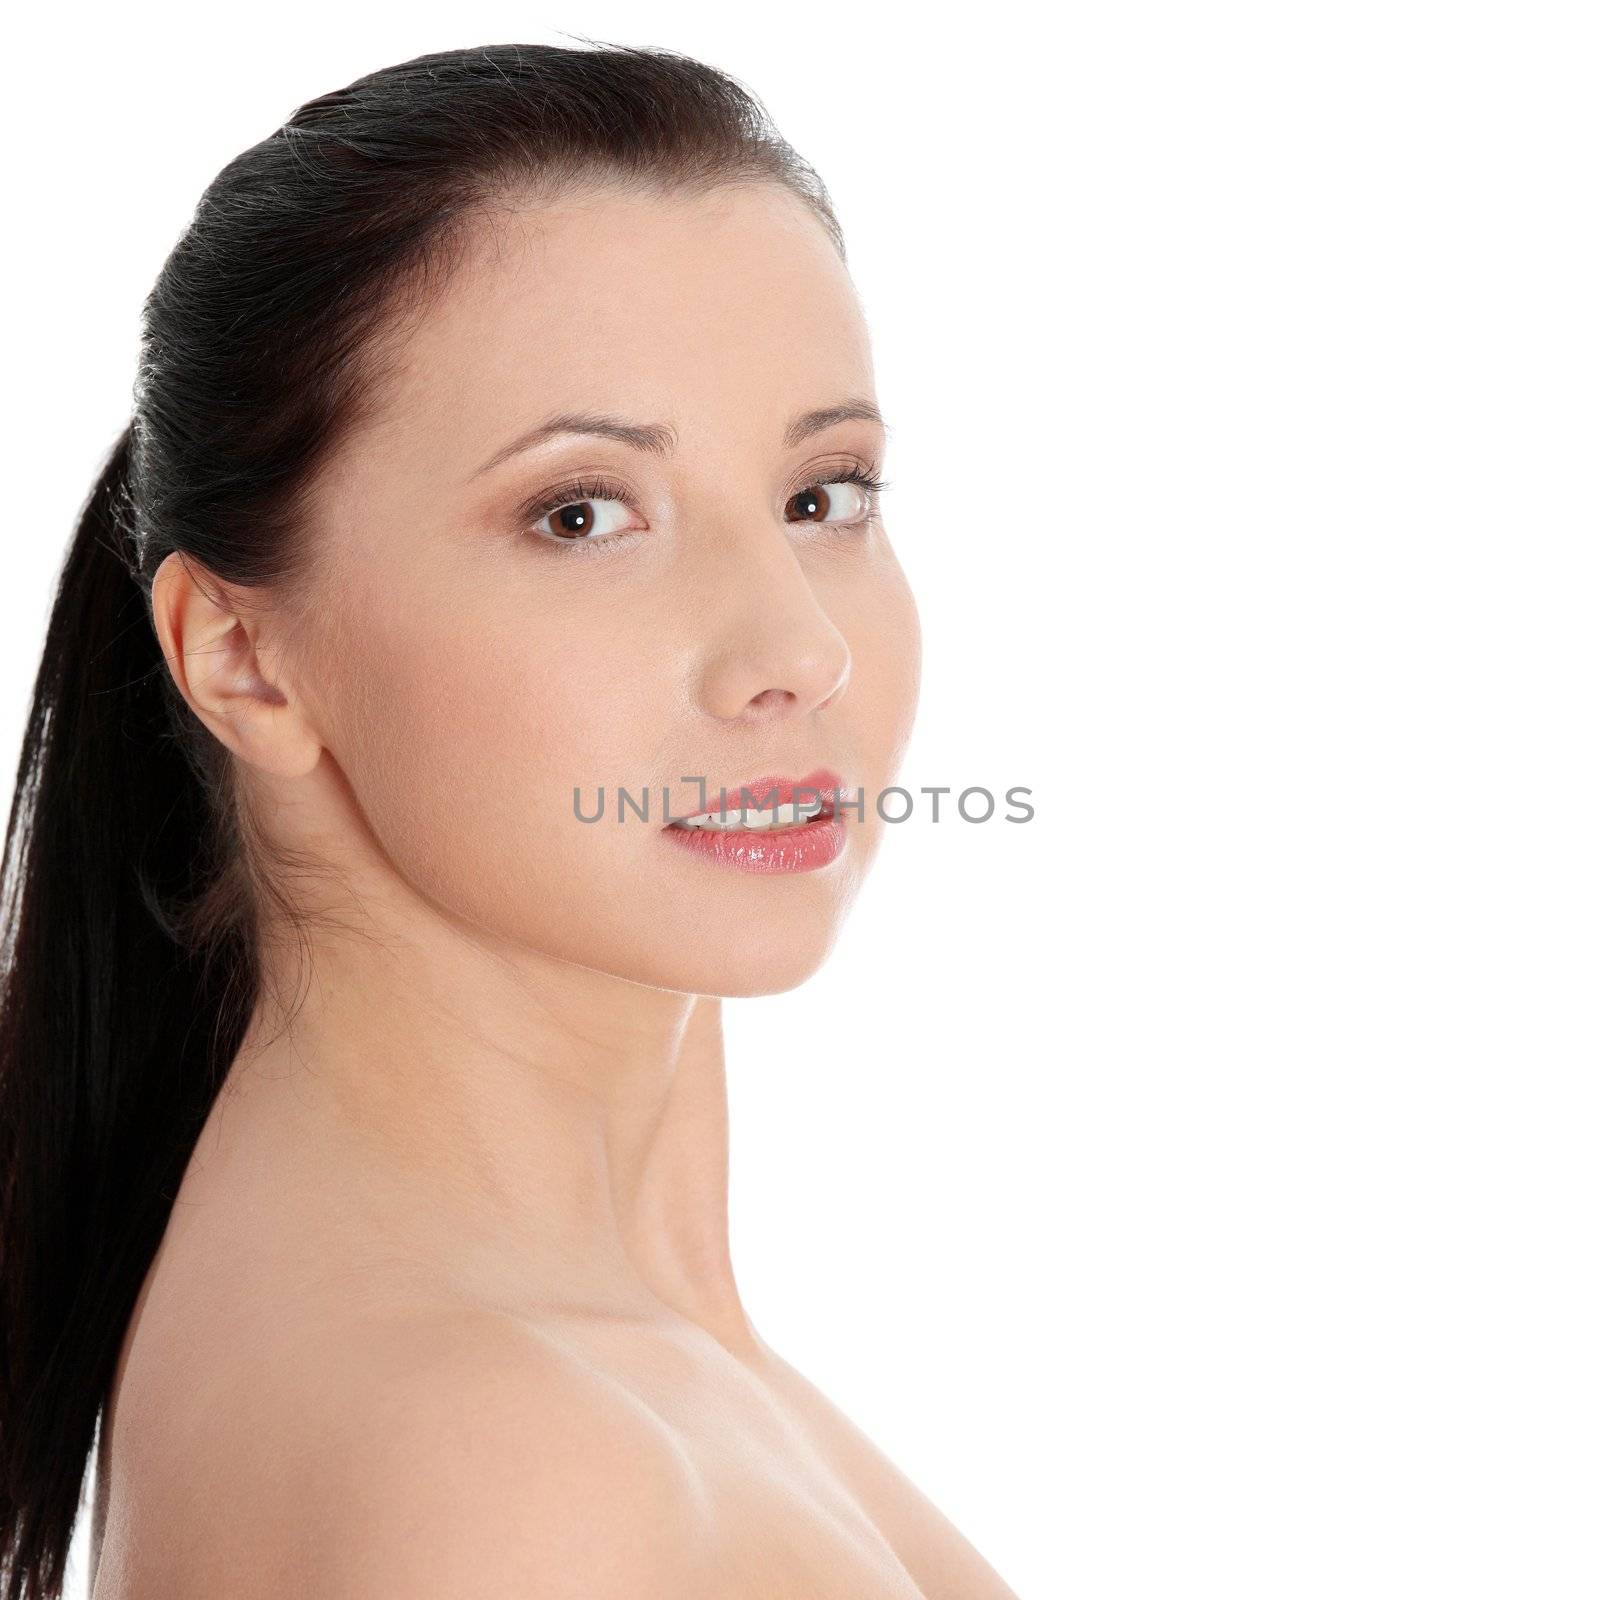 Beautiful woman's face with fresh clean skin